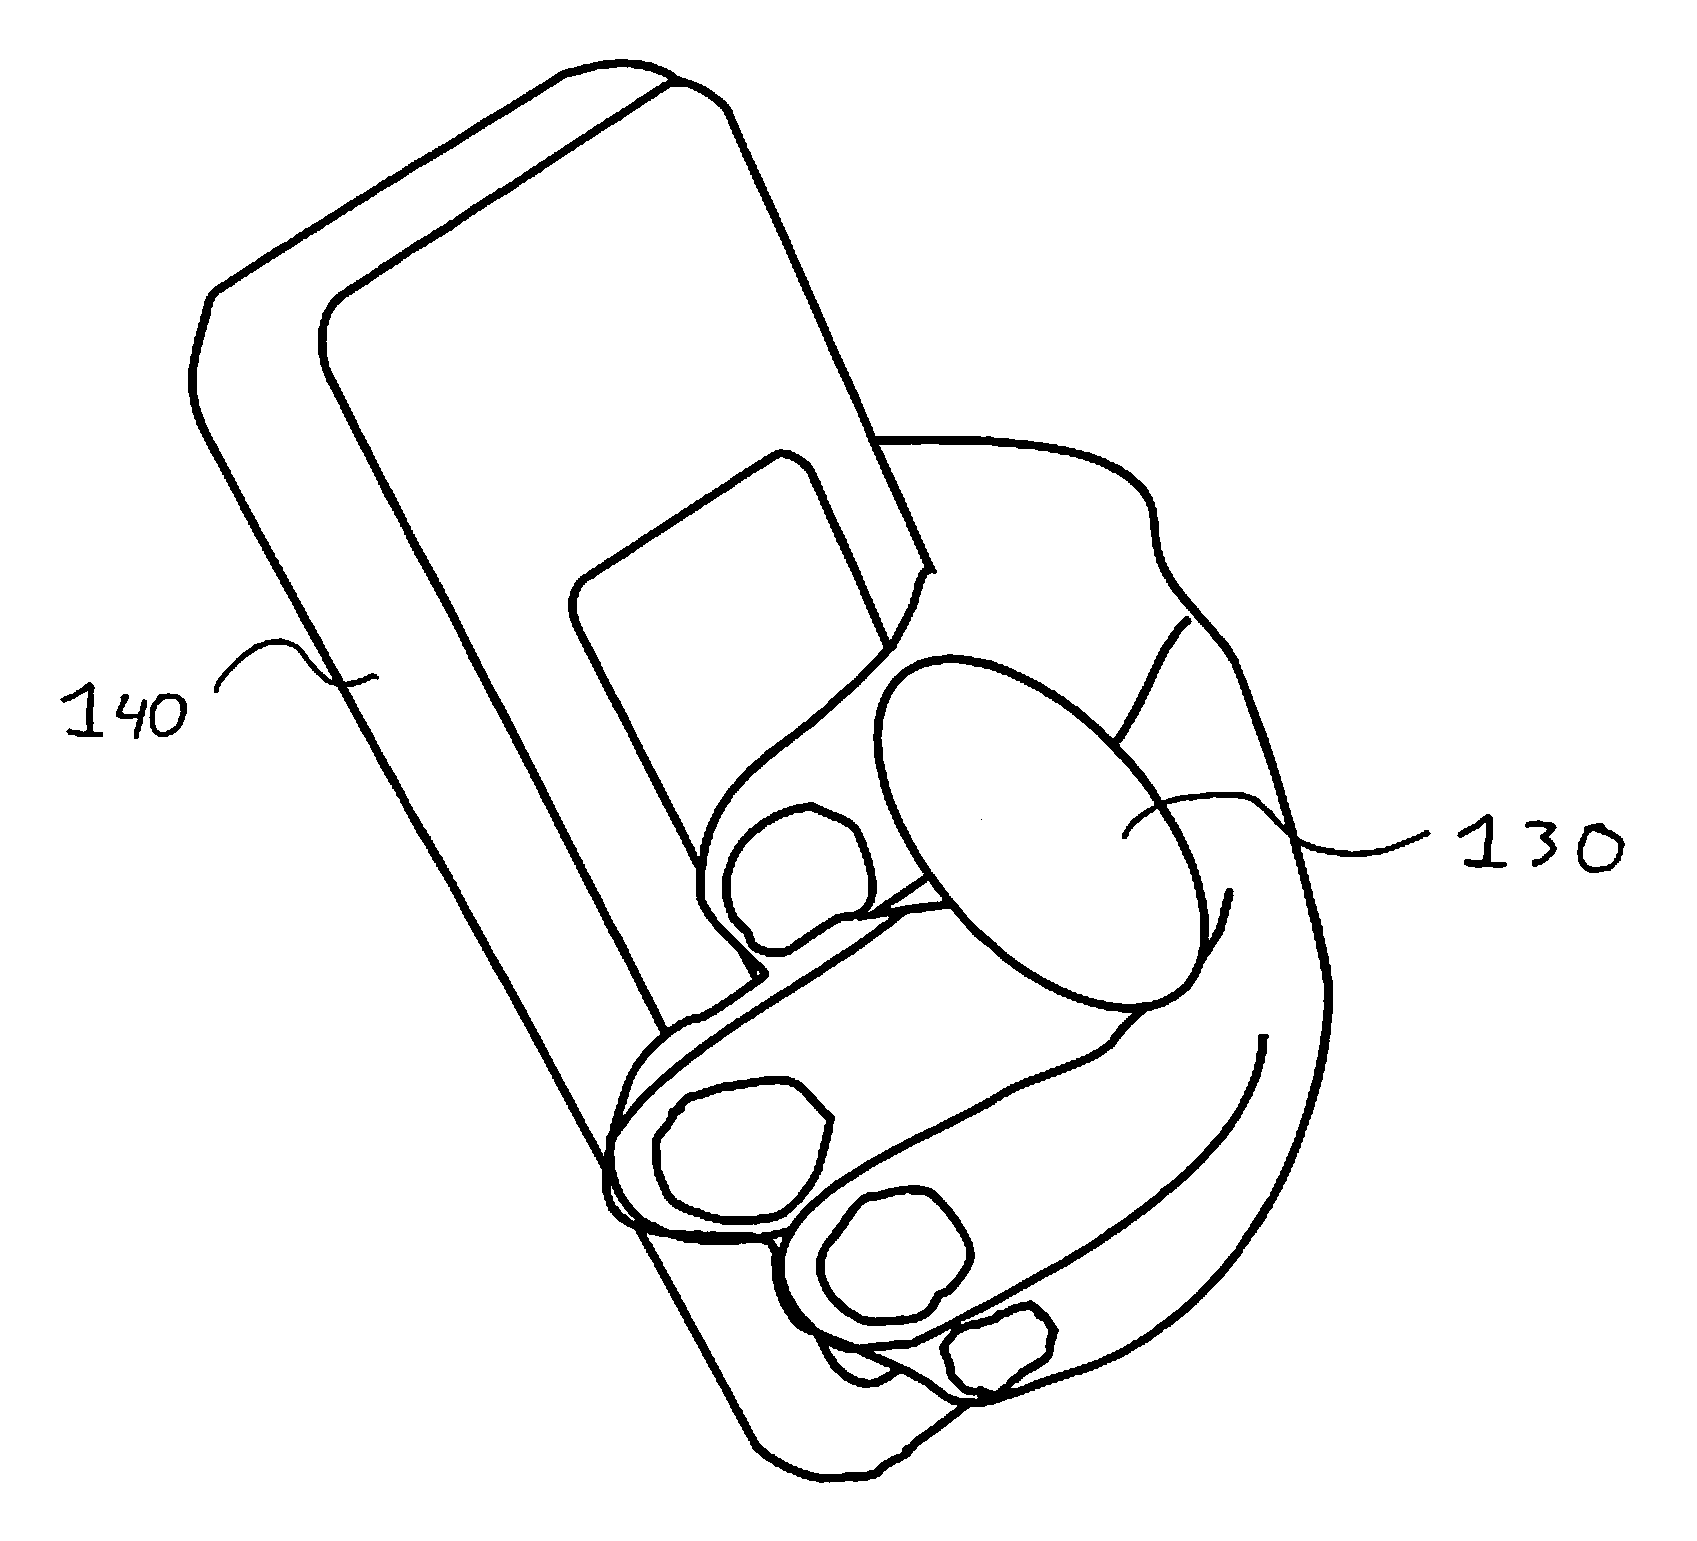 Apparatus for gripping handheld devices